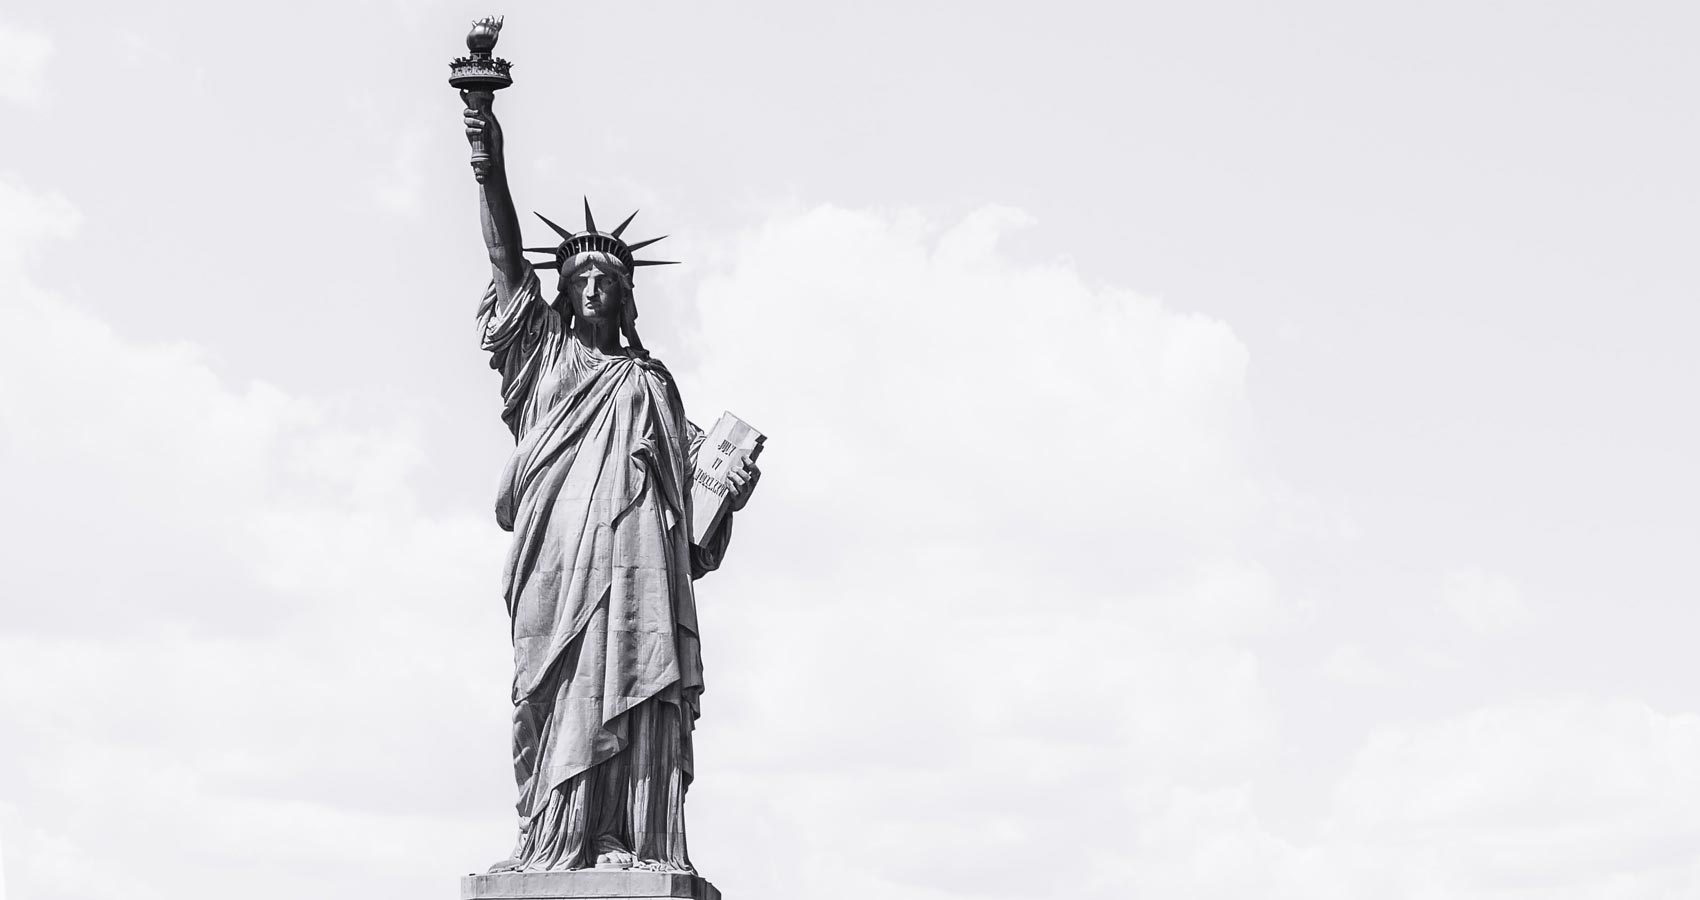 Welcome to America, a poem by Sue Marie St. Lee at Spillwords.com